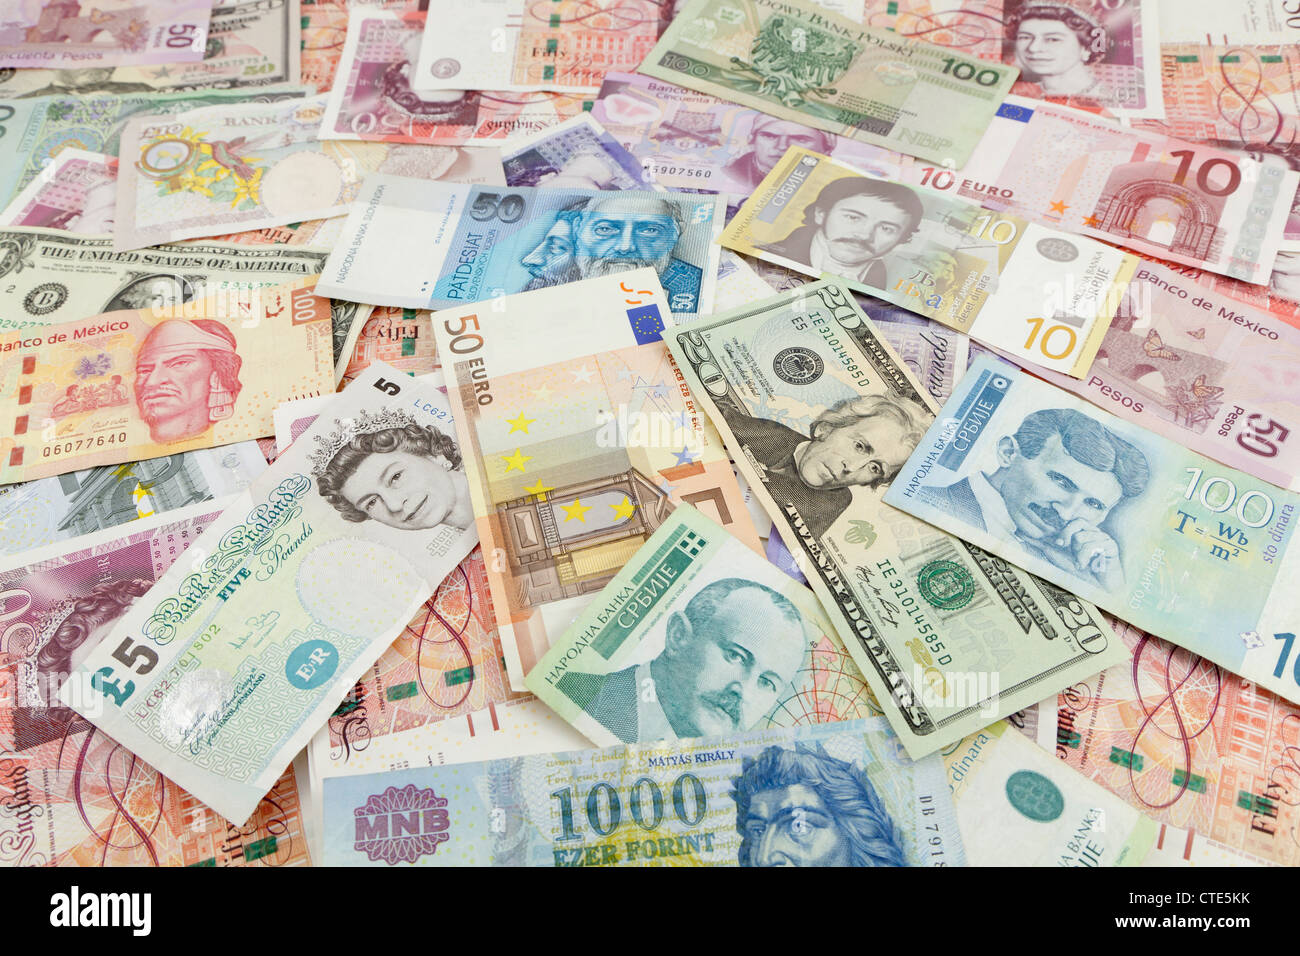 Foreign currency banknote Stock Photo